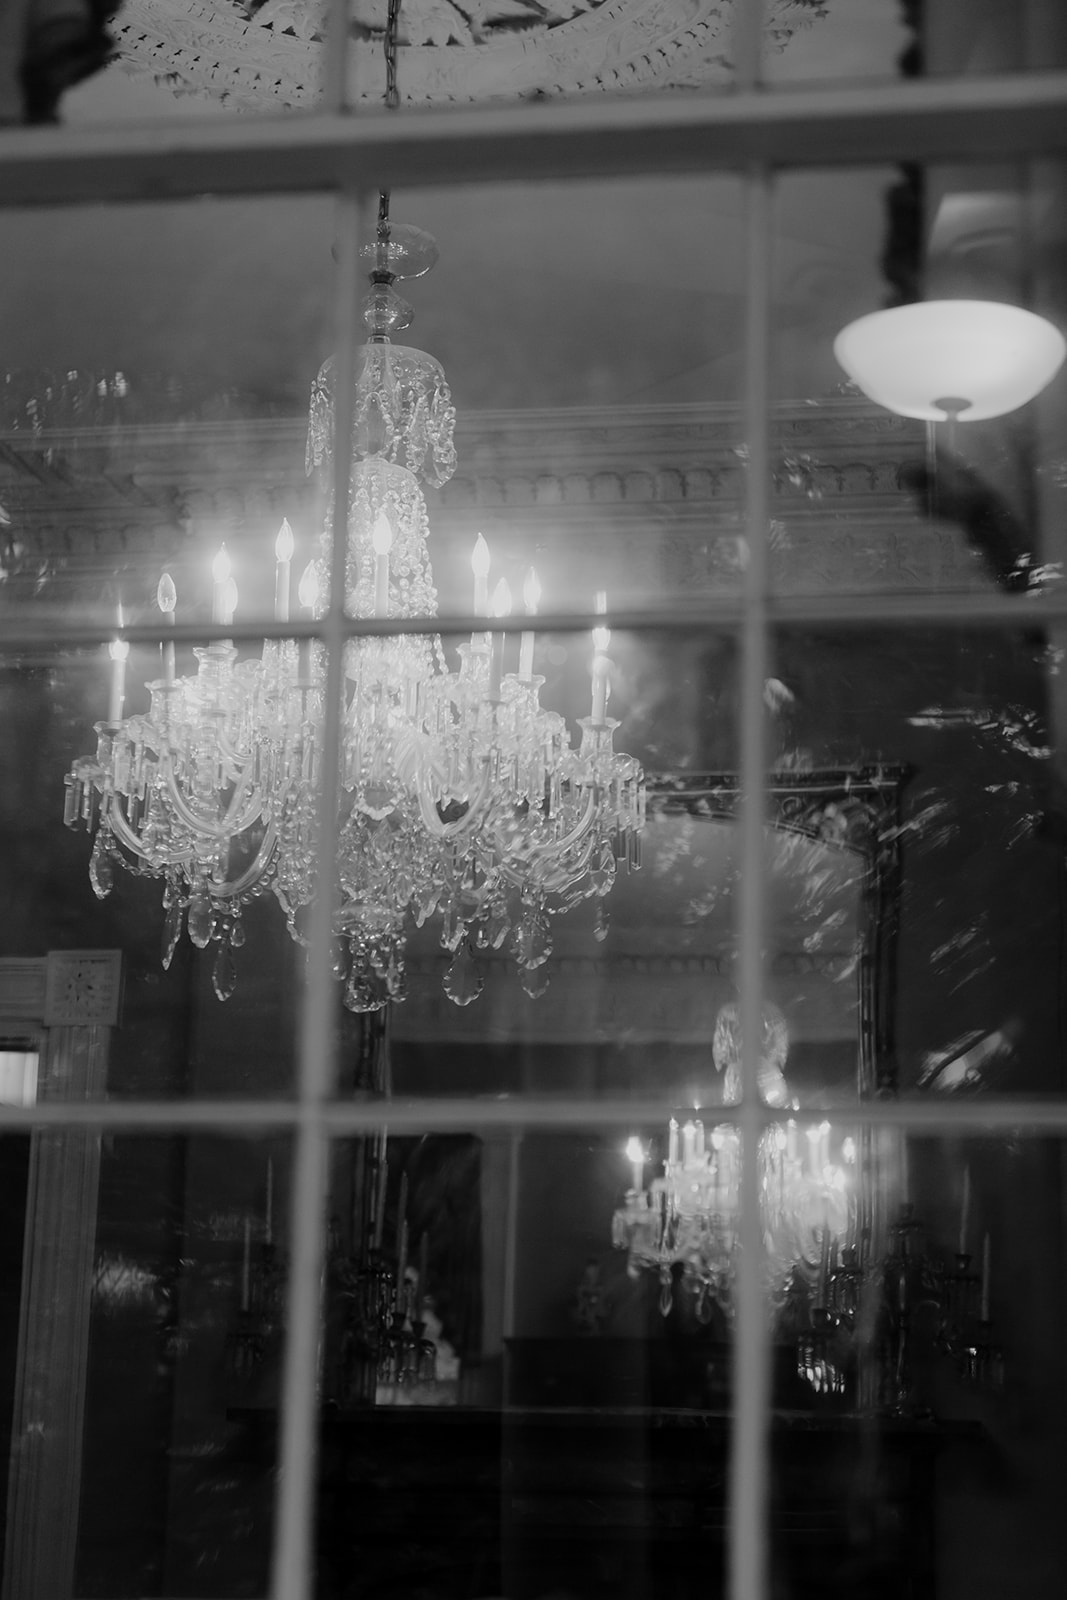 Chandelier at Gov. Thomas Bennett House photographed from the outside during wedding celebration